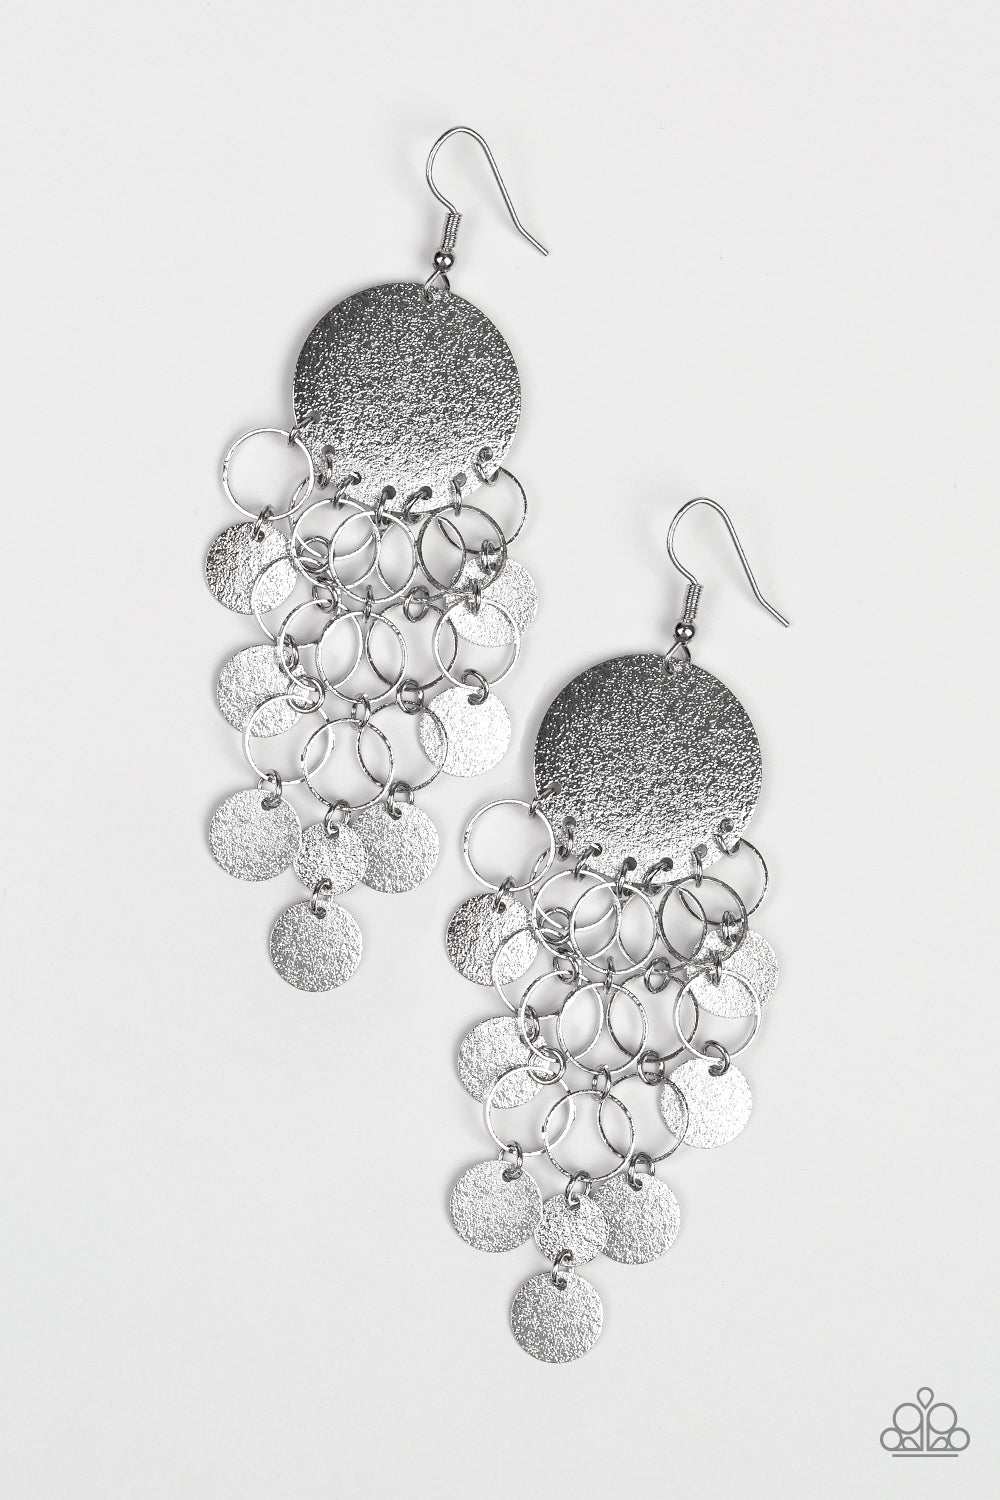 Turn On The Brights Silver Paparazzi Earring Cashmere Pink Jewels - Cashmere Pink Jewels & Accessories, Cashmere Pink Jewels & Accessories - Paparazzi